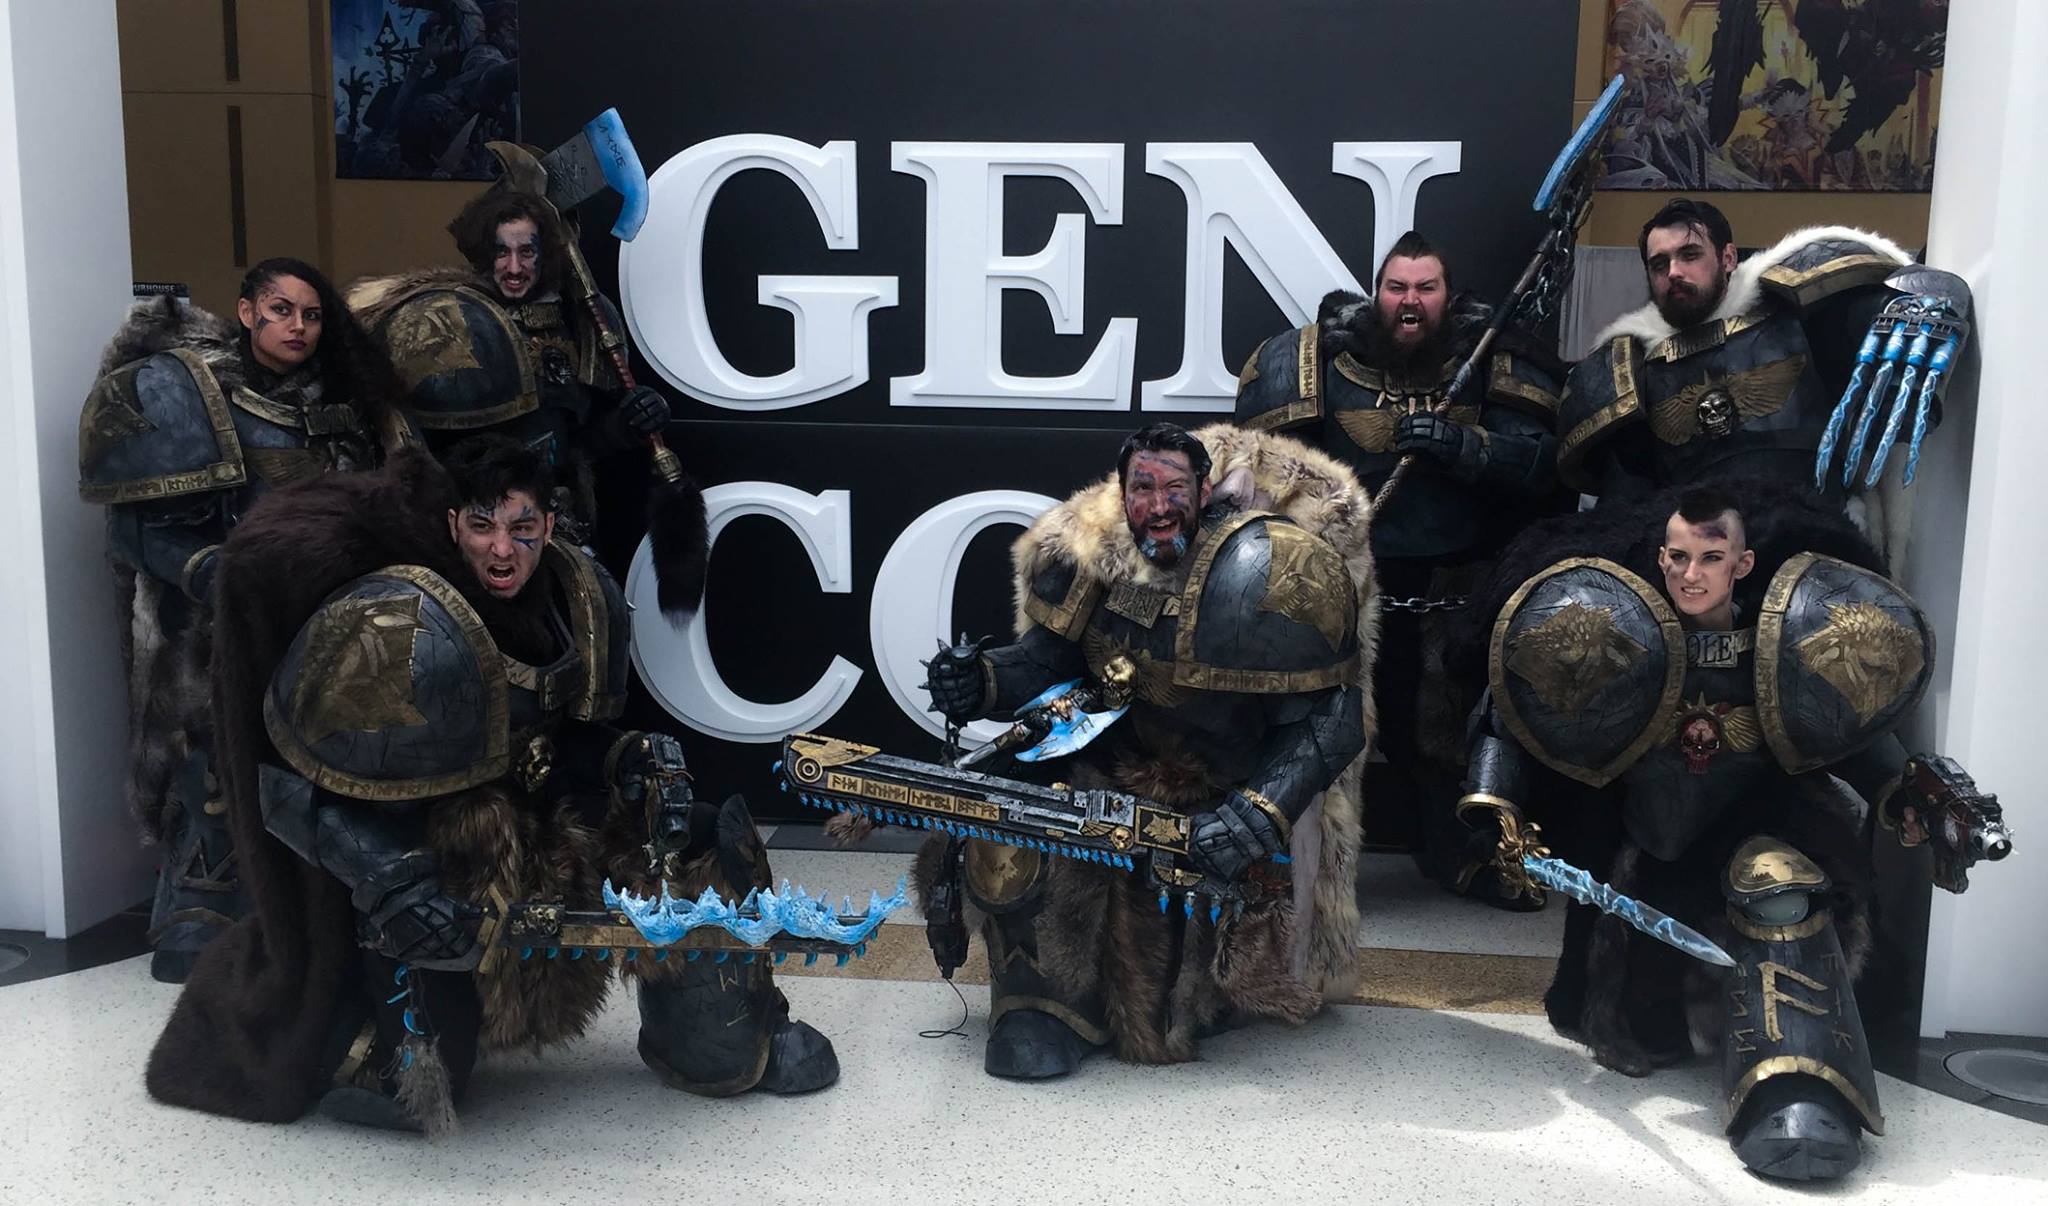 Warhammer 40K Cosplay Is Ready To Die For The Emperor